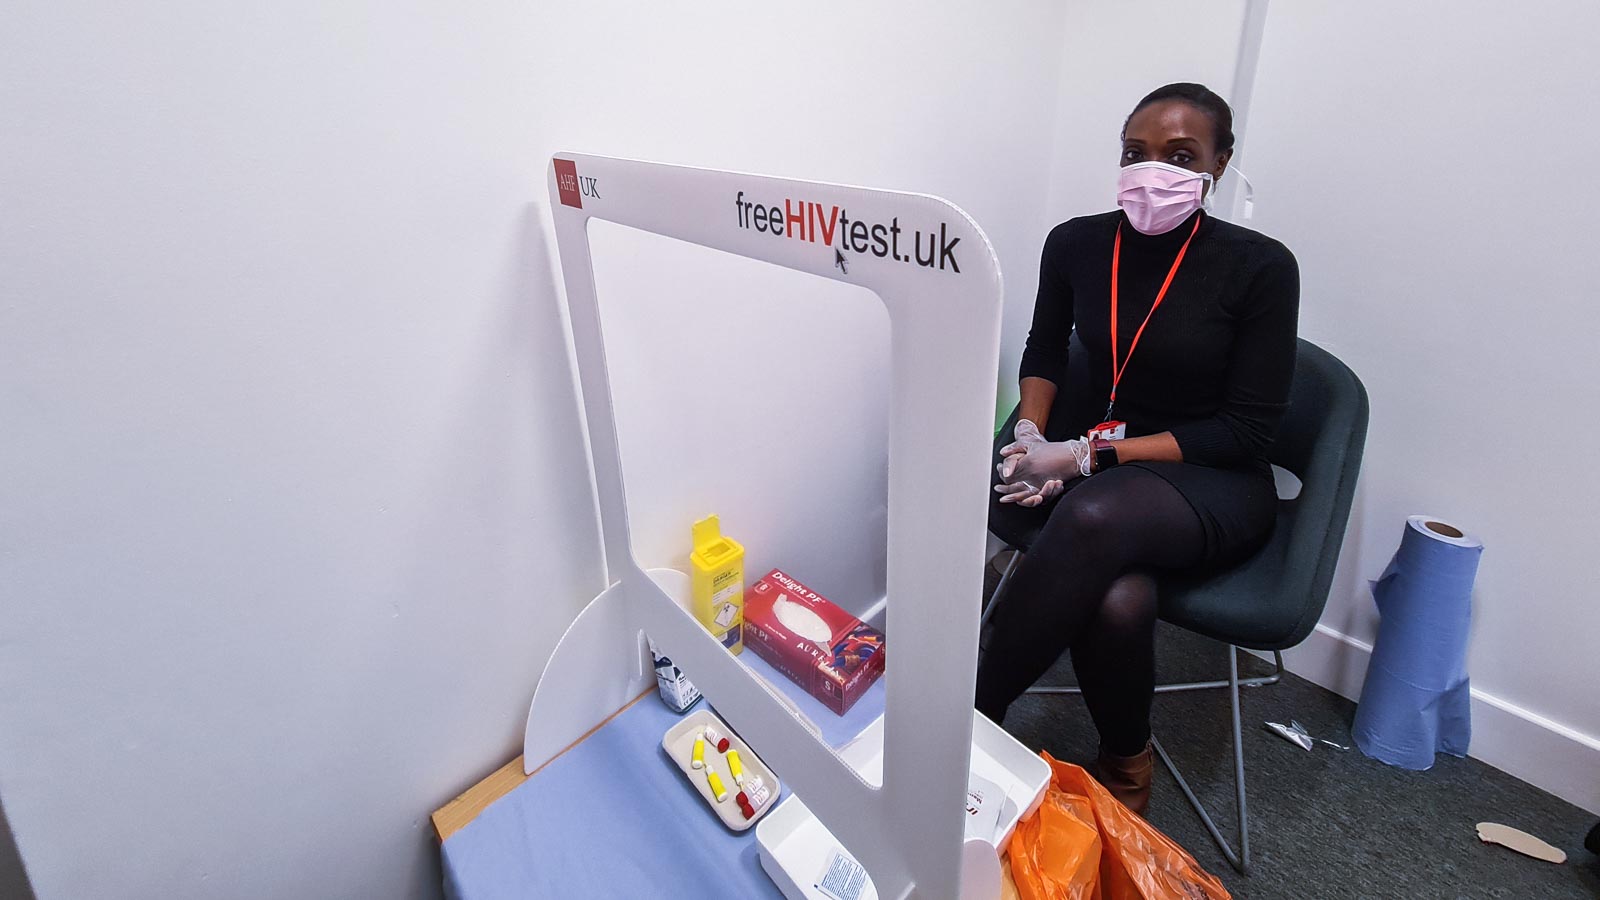 Our AHF Staff distributing condoms and giving HIV tests at Carers Support Centrein Croydon.